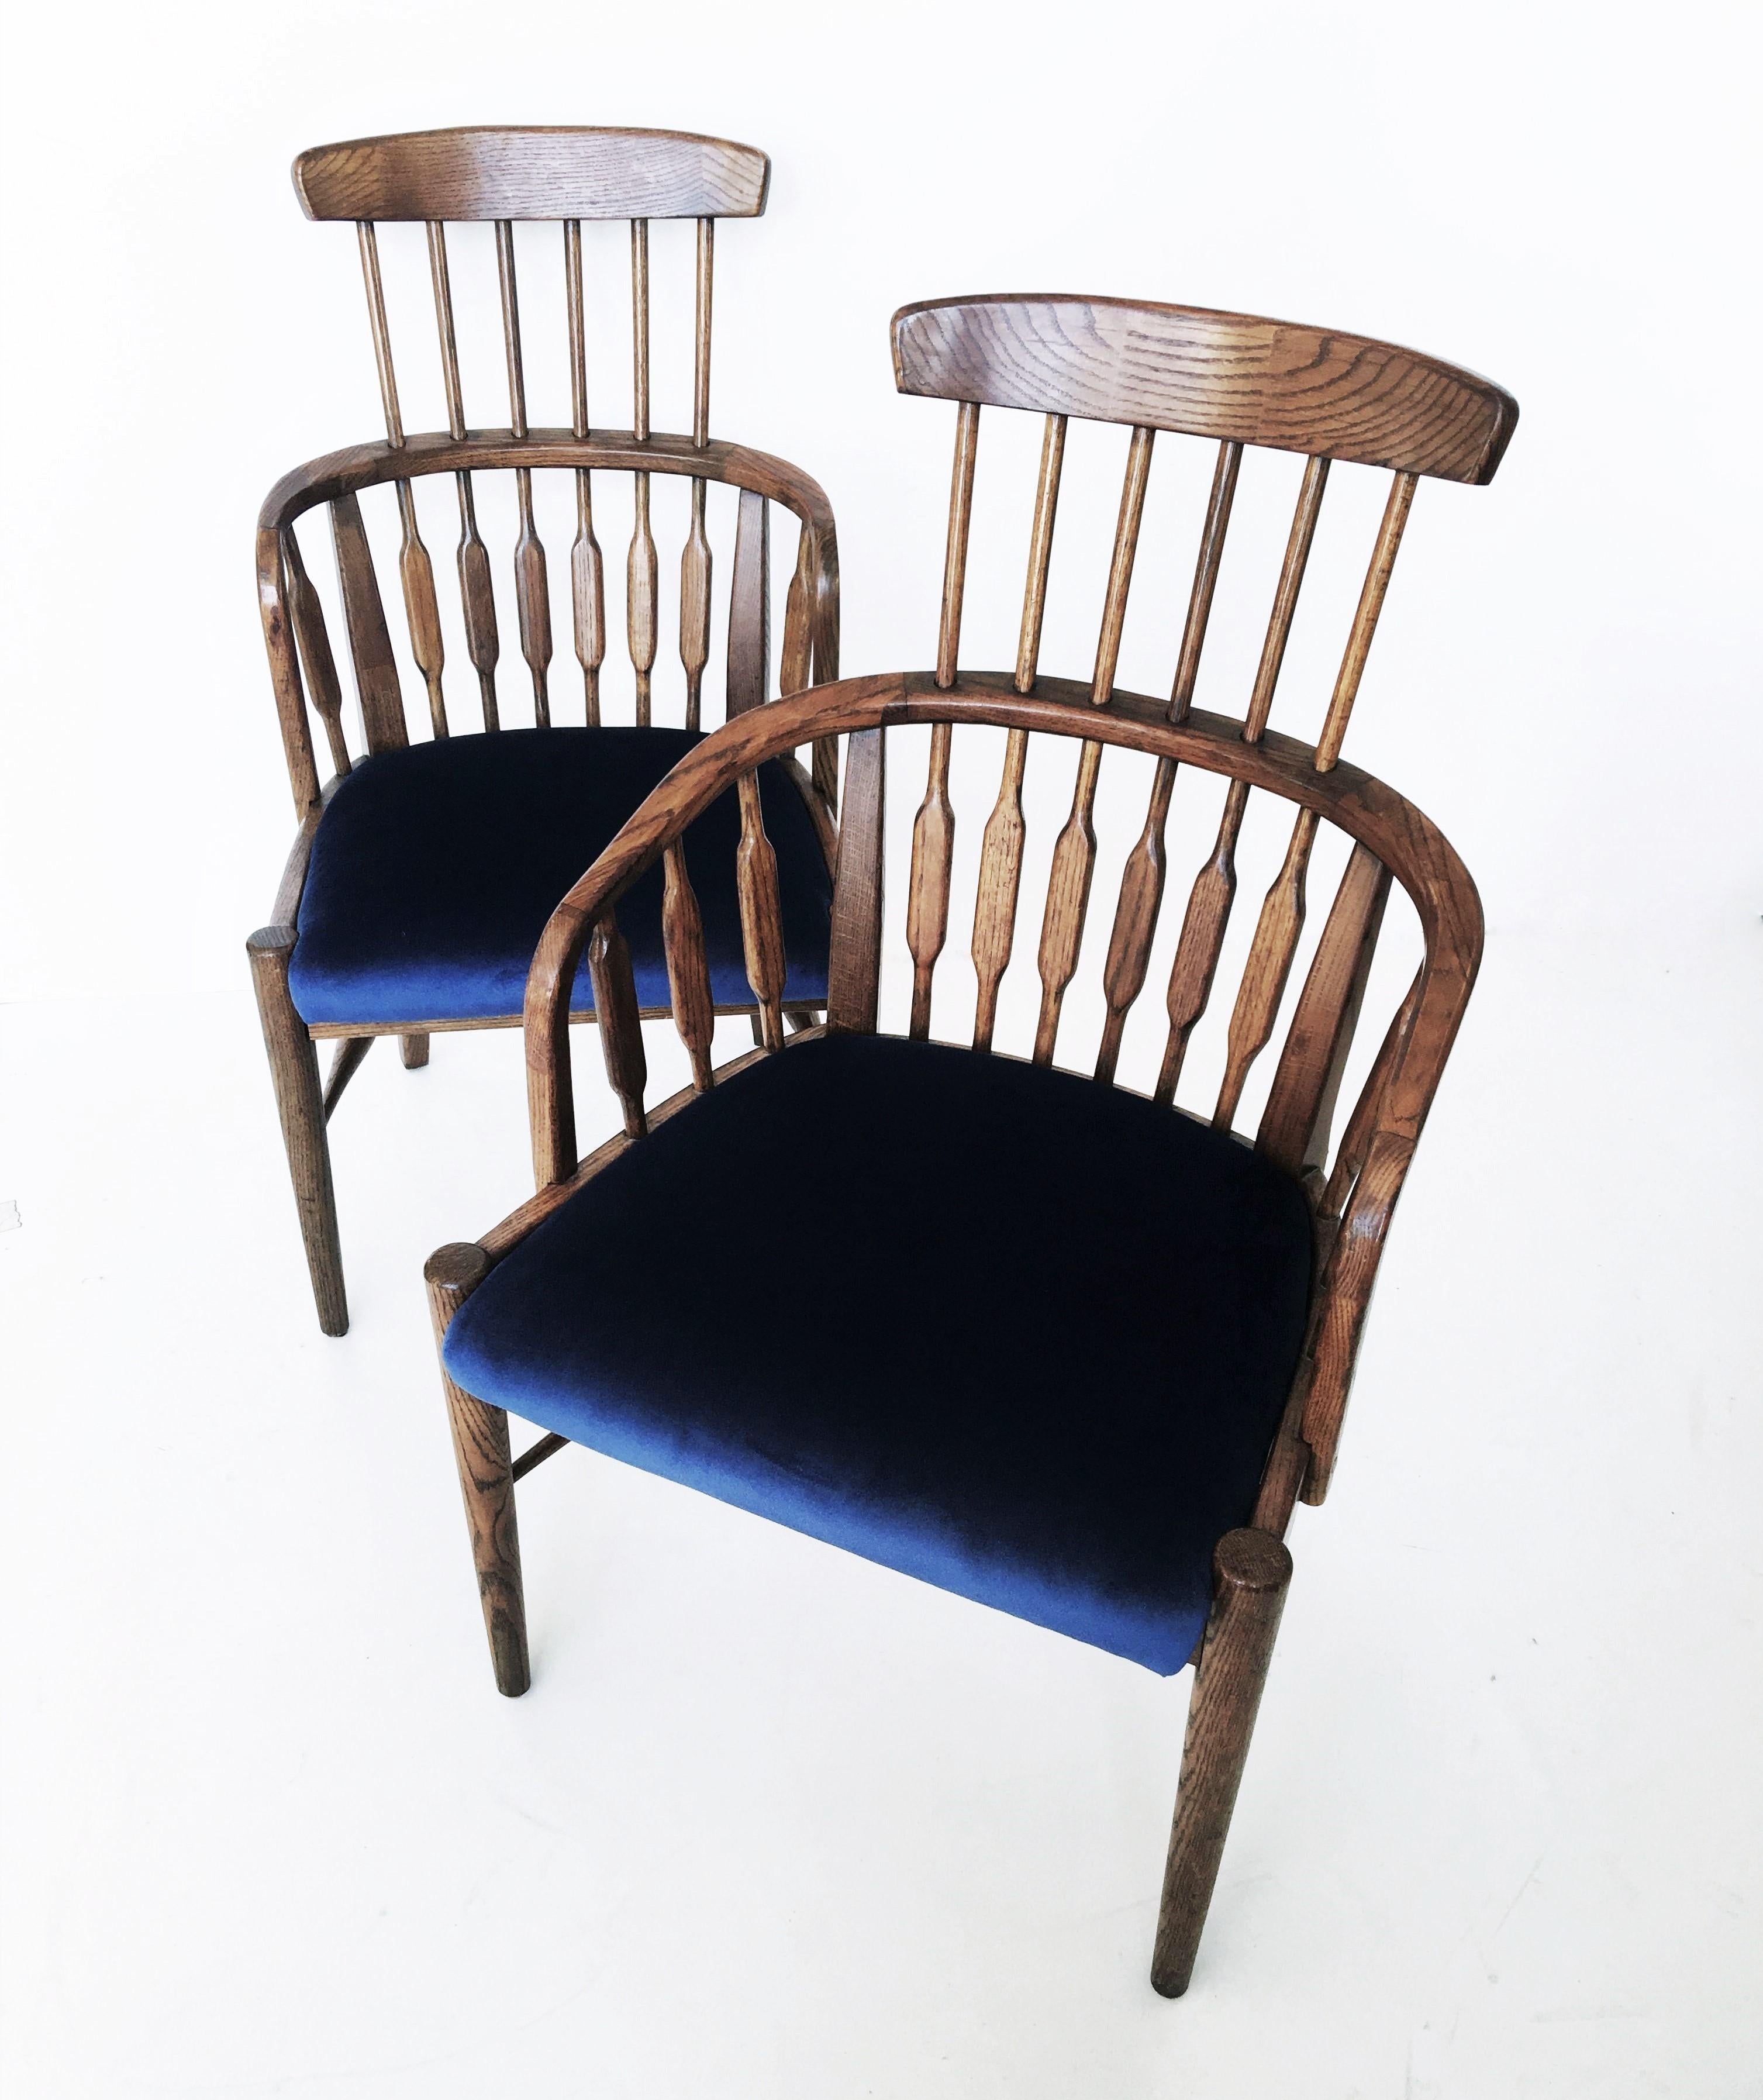 The Windsor is one of the most archetypal of English vernacular chairs. This unique set of six are a modern take of the classic Windsor chairs of the past. There are two (2) host and four (4) side chairs. These solid wood chairs feature graceful low